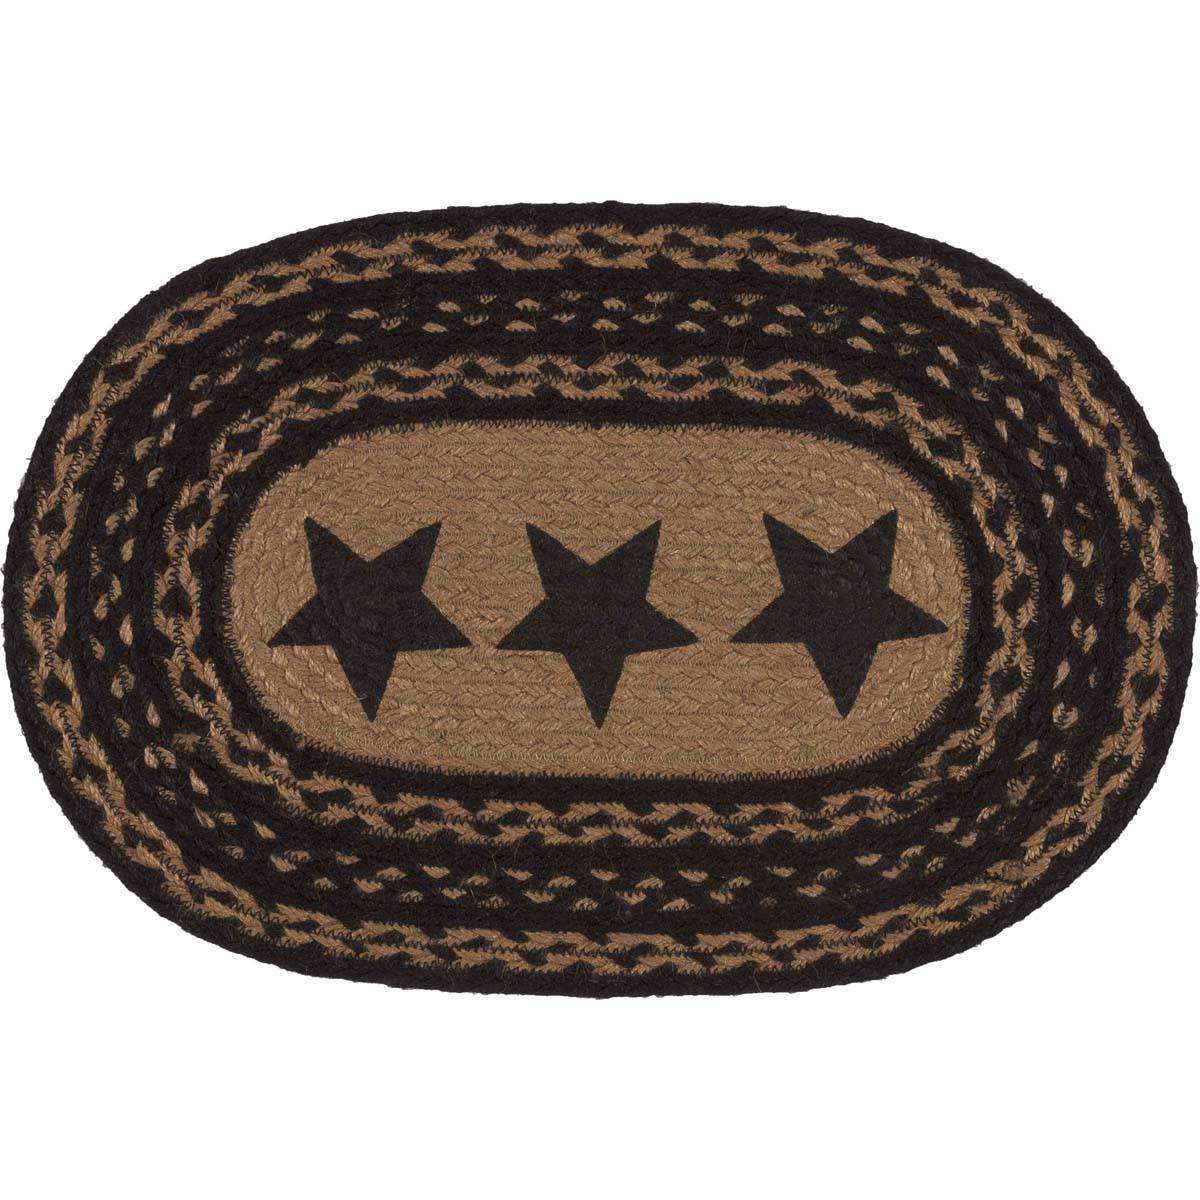 Farmhouse Jute Braided Placemats Stencil Stars Set of 6 table mats VHC Brands 